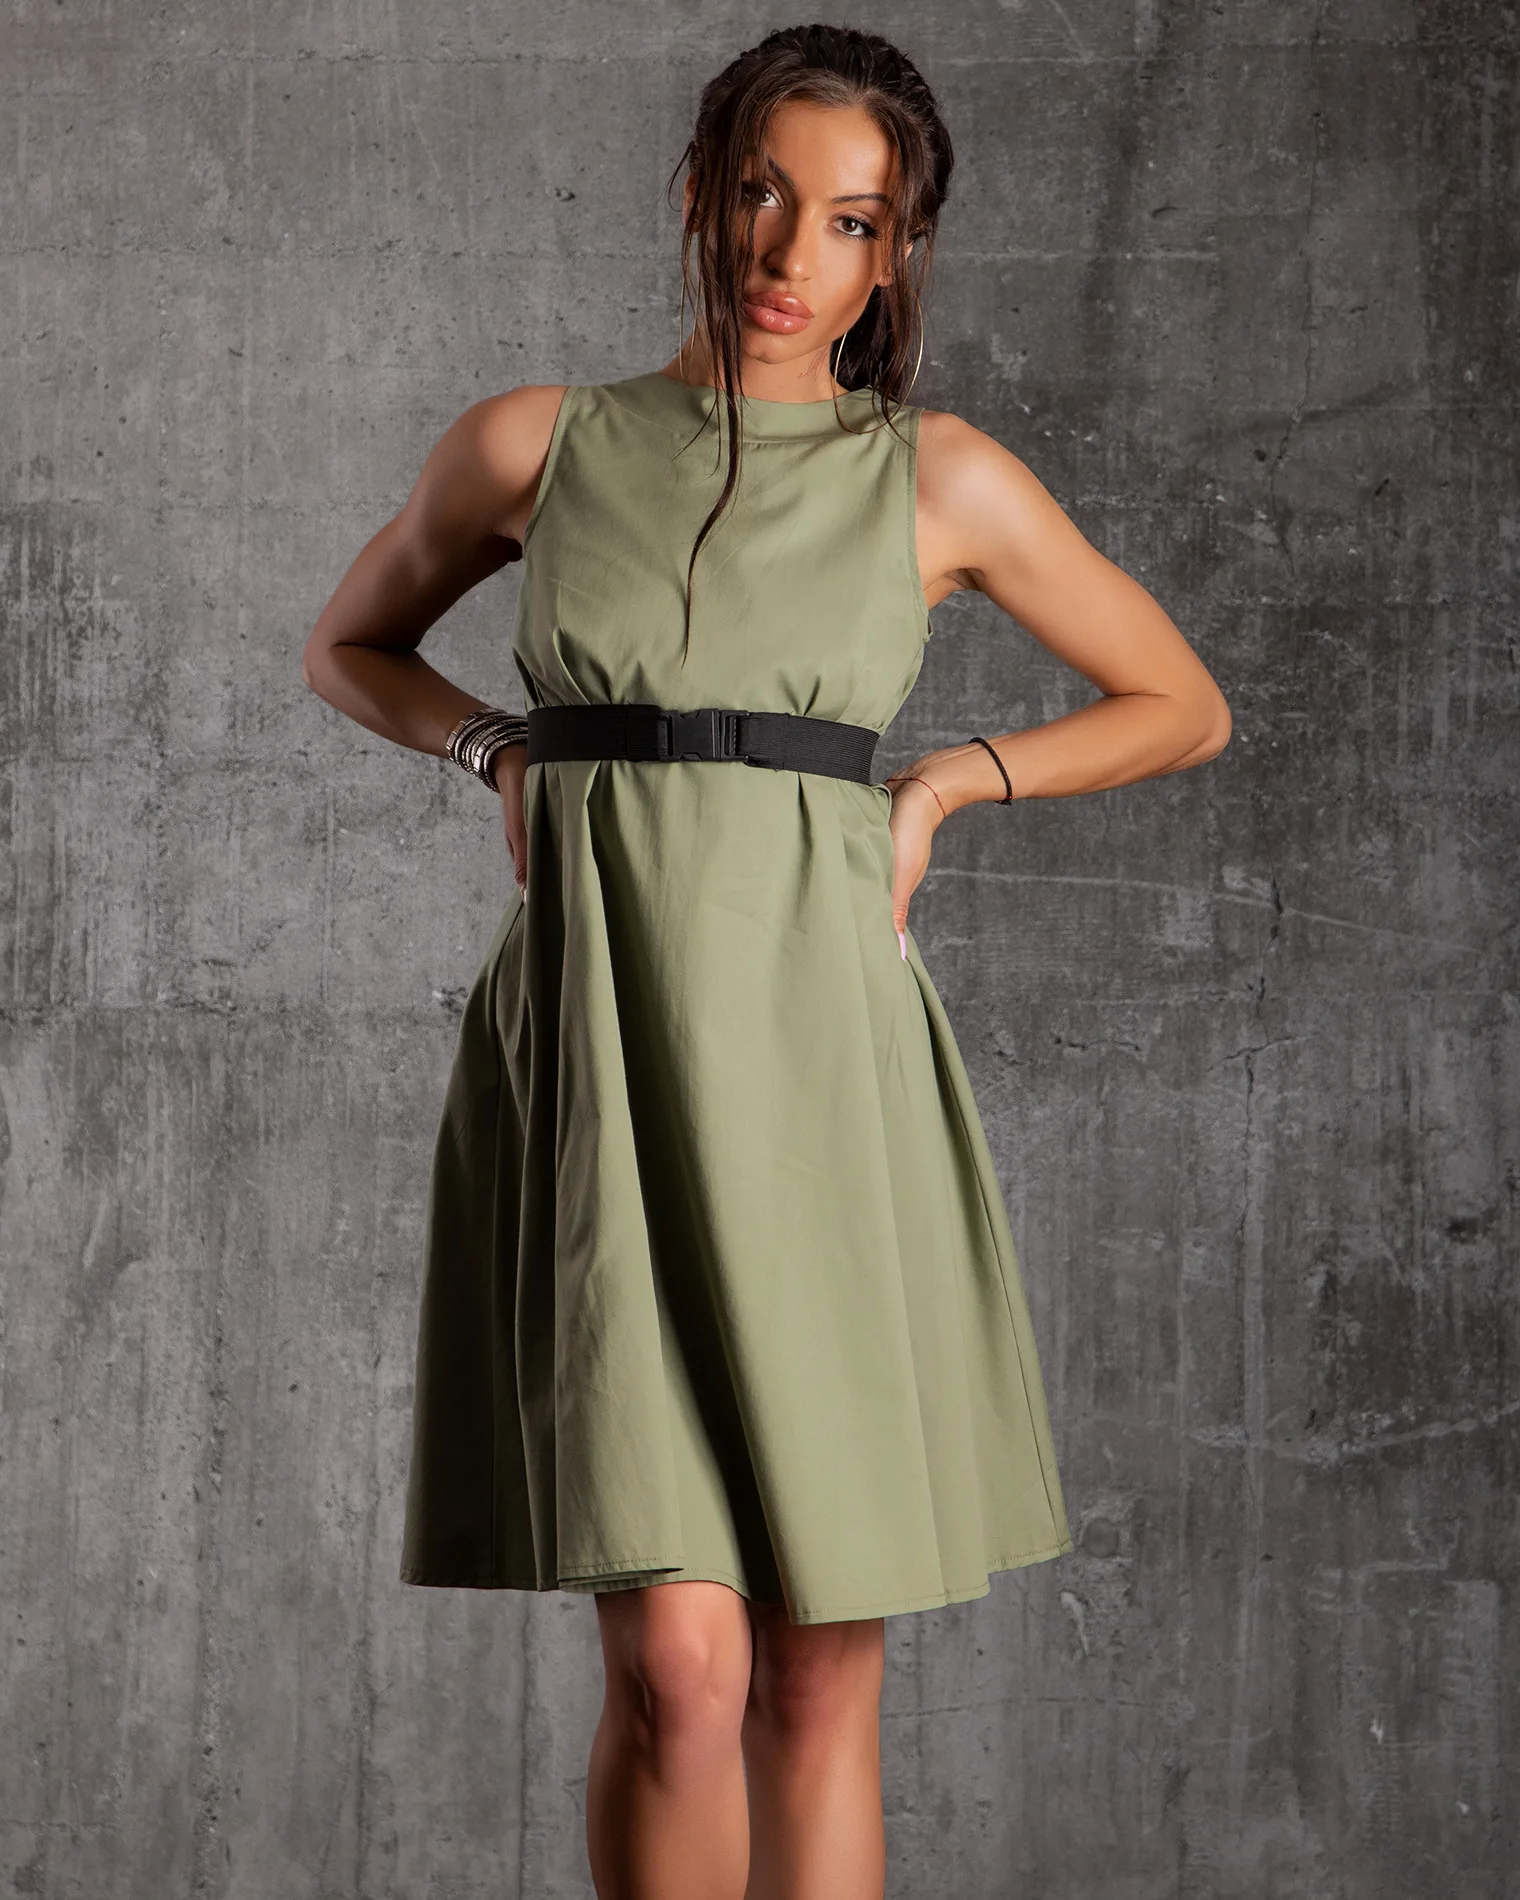 Aventino Dress With A Belt, Green Color